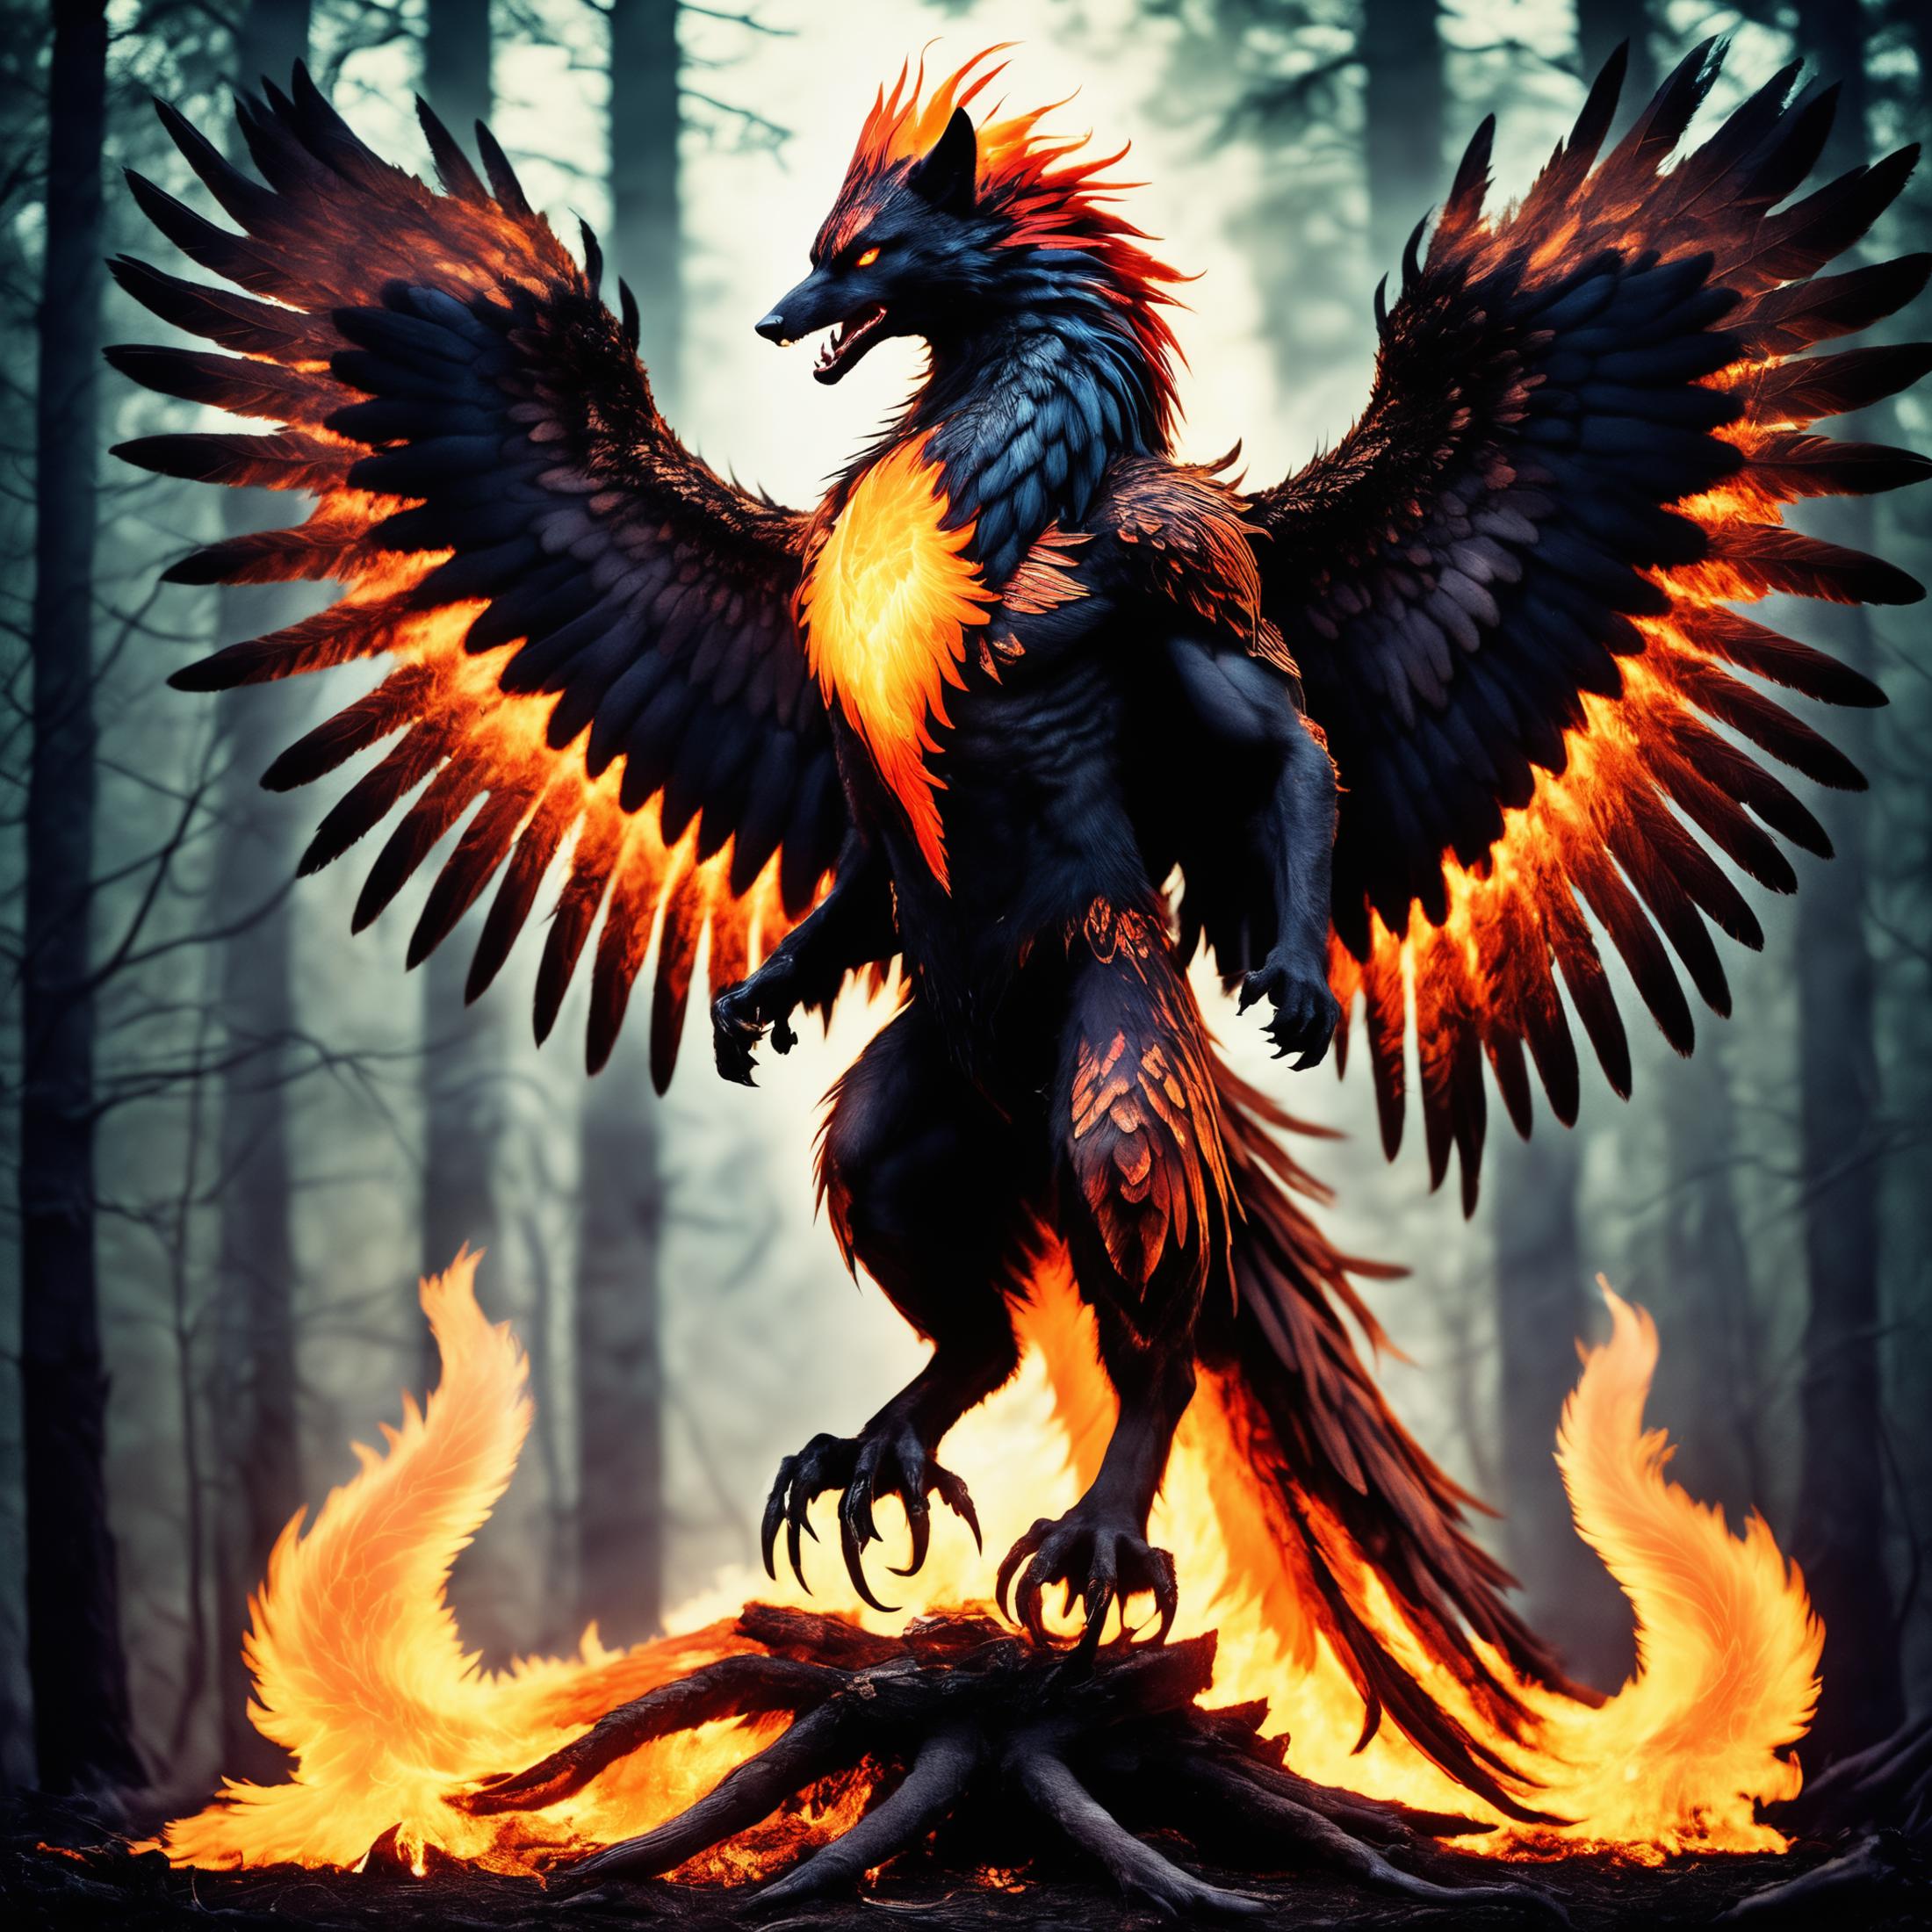 Phoenix image by TrafficMeany